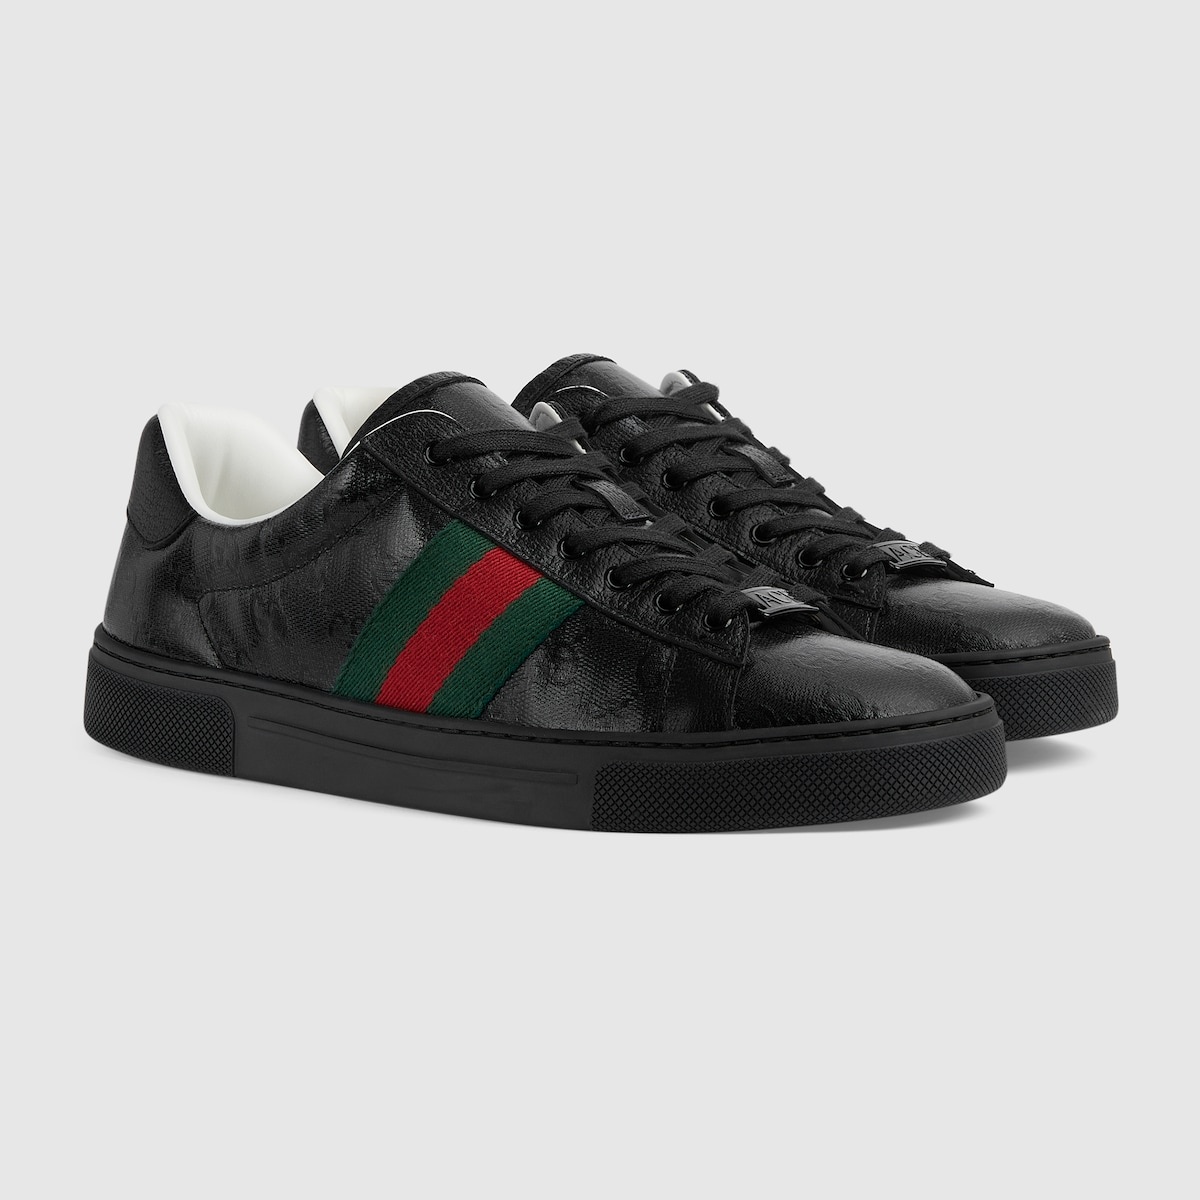 Women's Gucci Ace sneaker with Web - 2